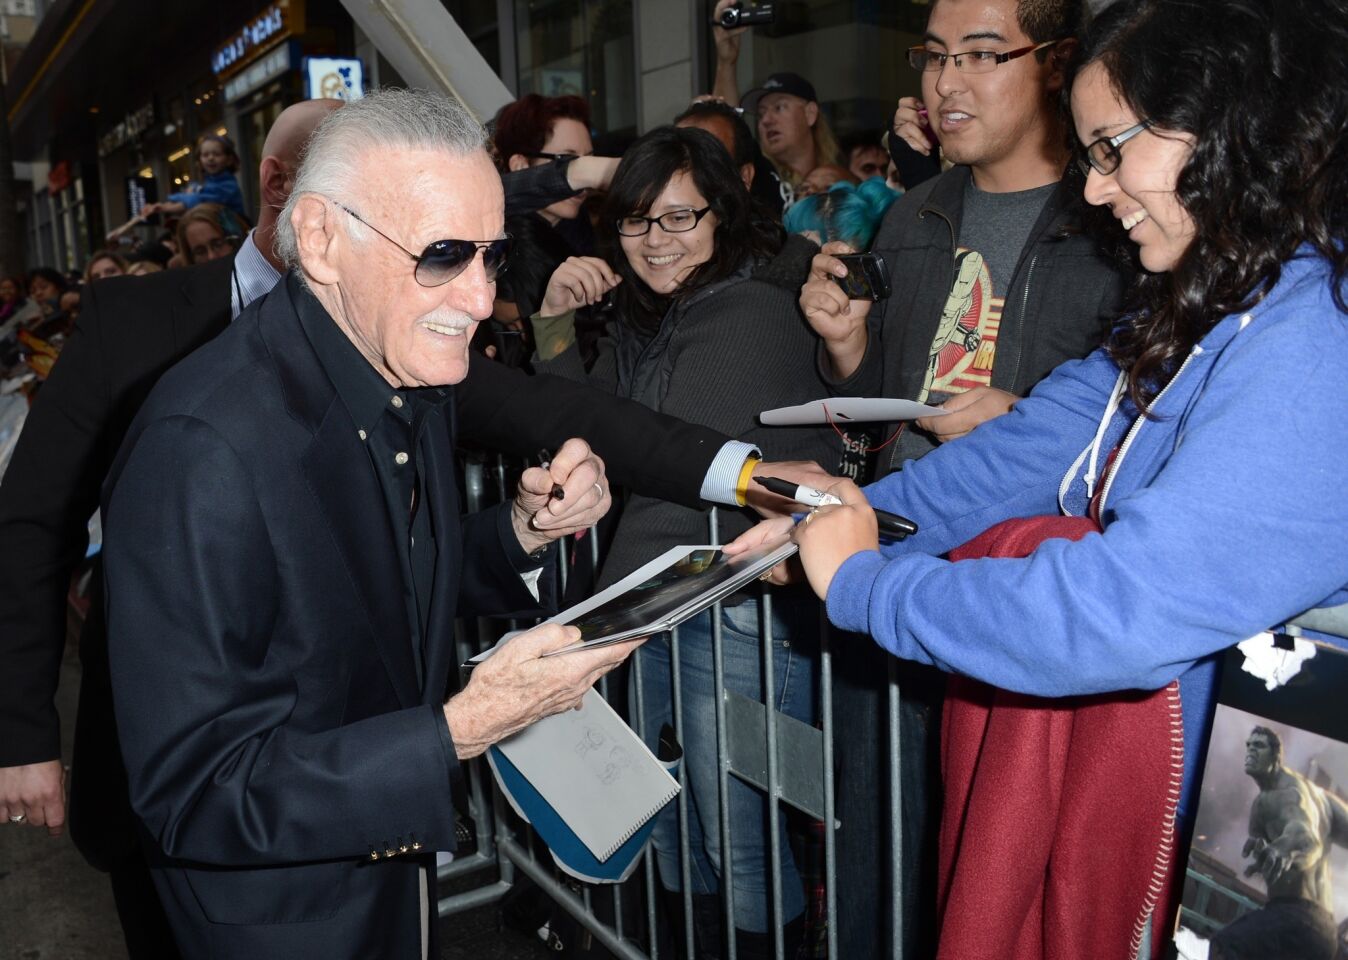 Stan Lee stops to sign autographs.